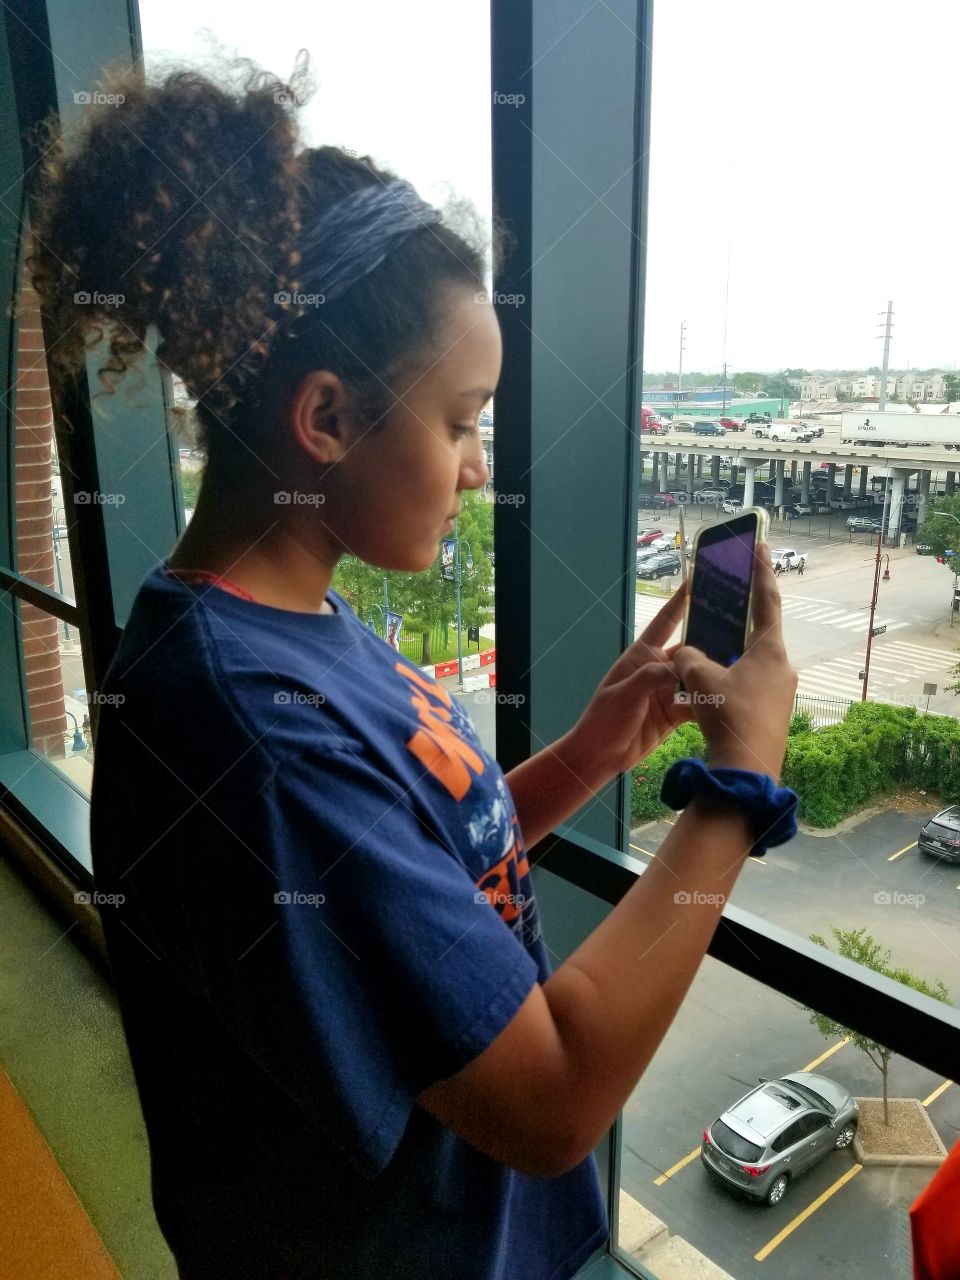 Girl taking pictures outside window.